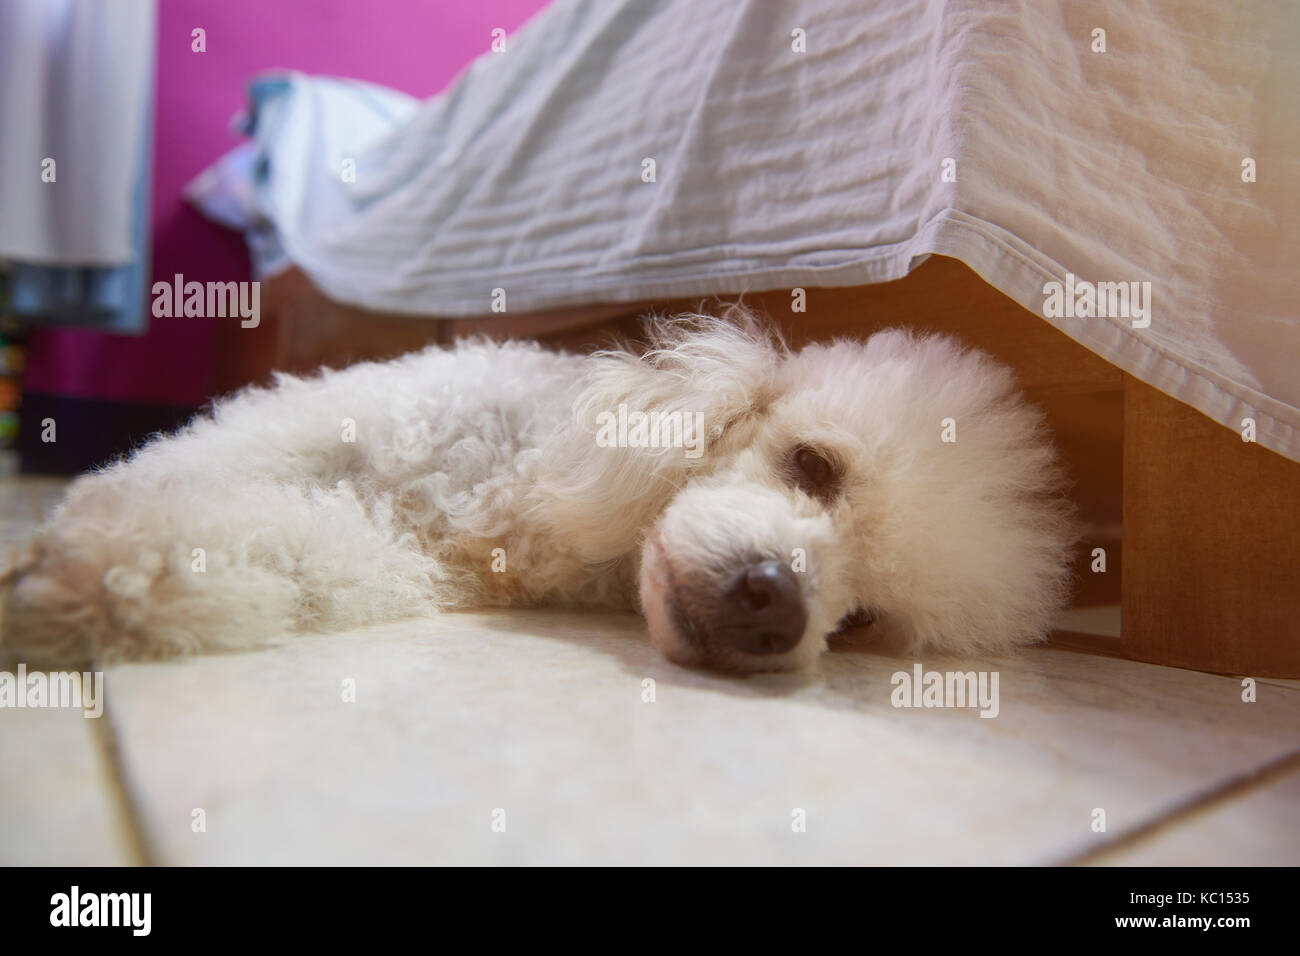 Depressed white poodle dog lay on room floor next to bed Stock Photo